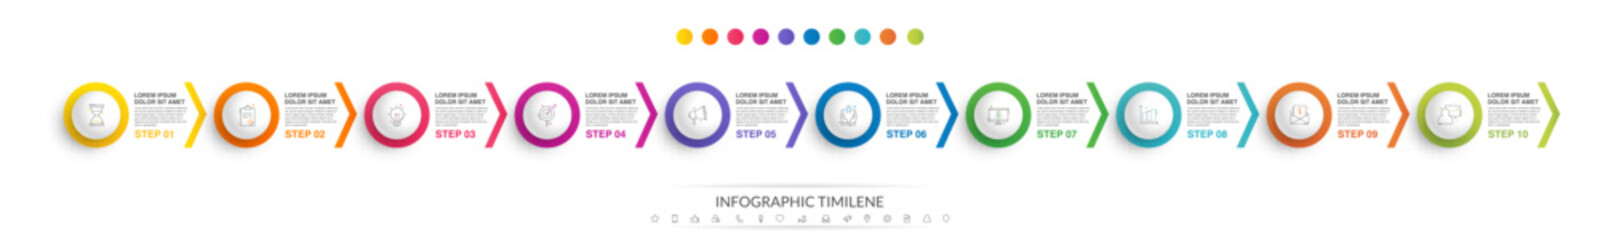 Business vector infographic design template. Circle timeline with icons and 10 ten arrows or steps. Used for process diagram, presentations, workflow layout, info graph, banner, flow chart